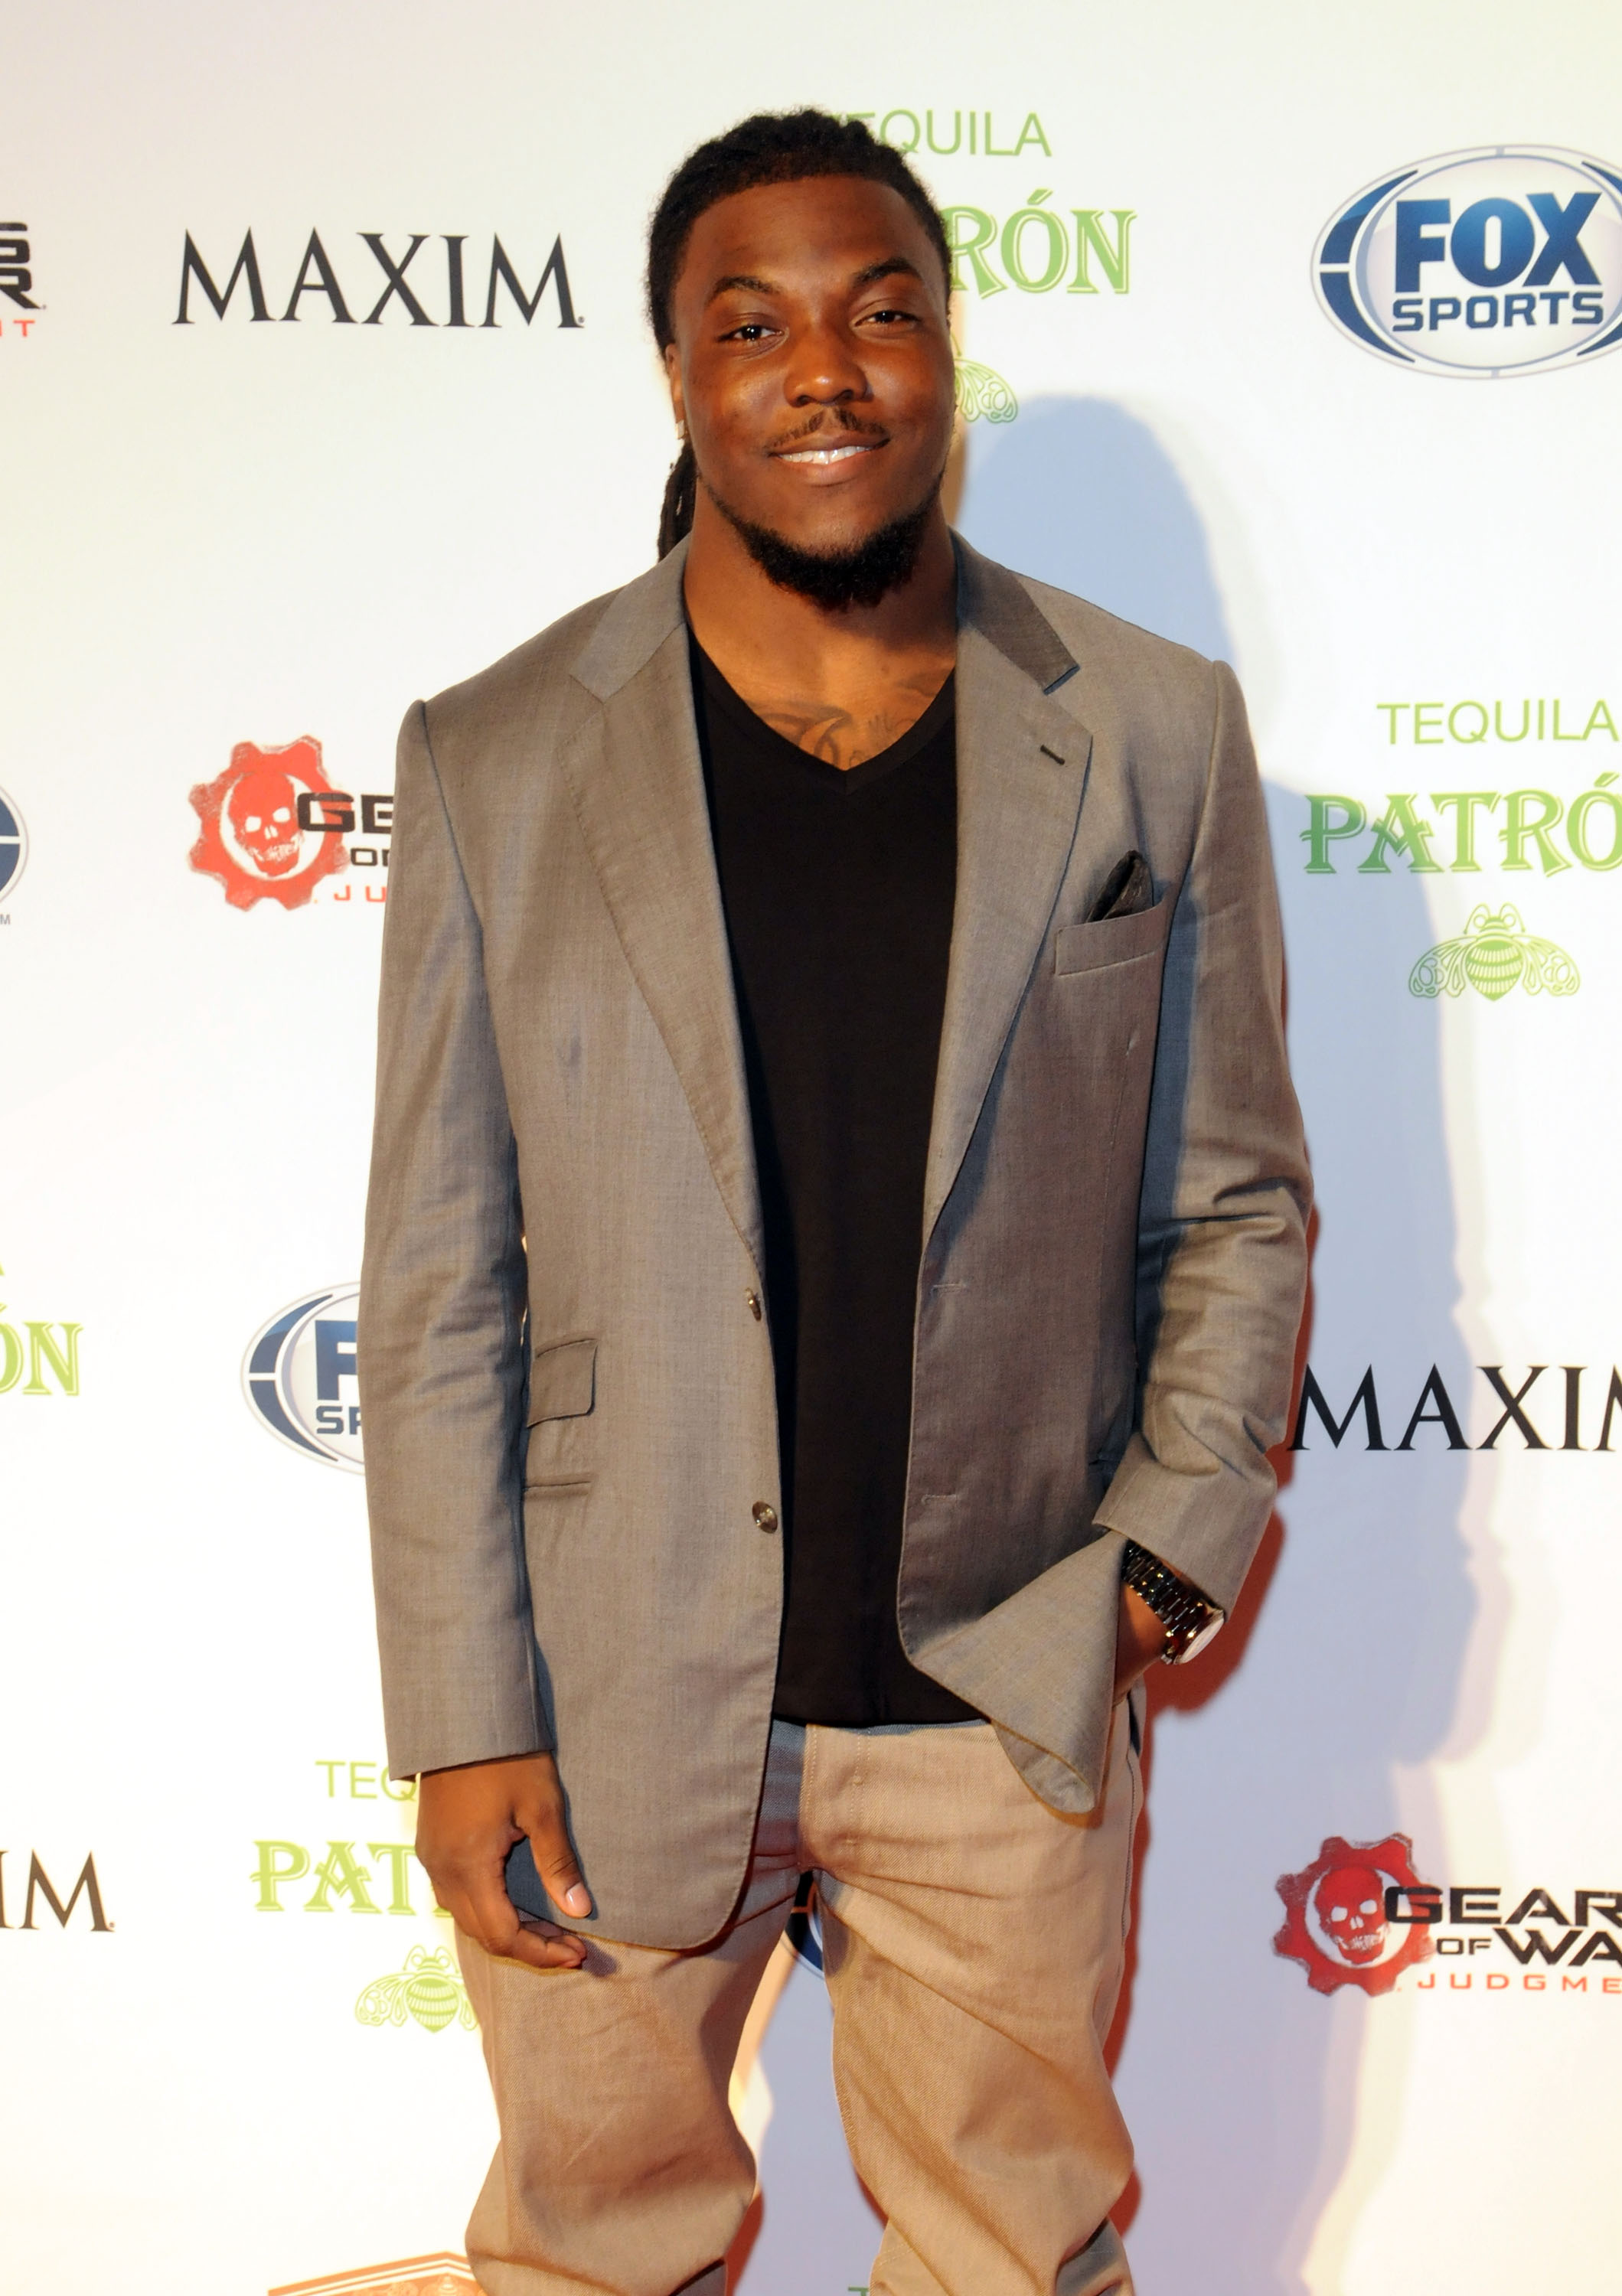 Patron Tequila Presents The Maxim Party With "Gears of War: Judgment" For XBOX 360, FOX Sports & Starter